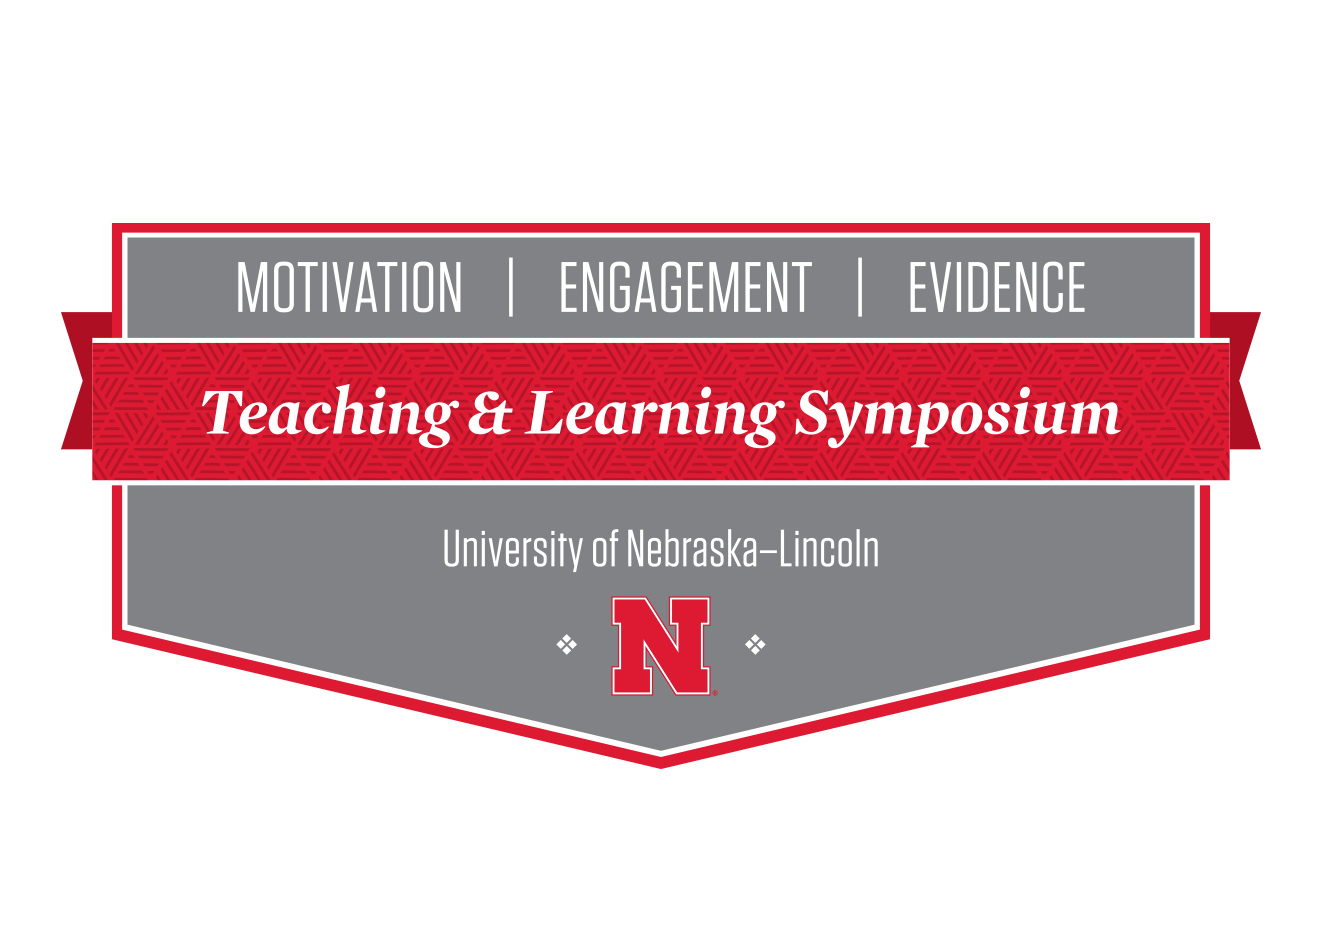 National experiential learning expert headlines teaching symposium